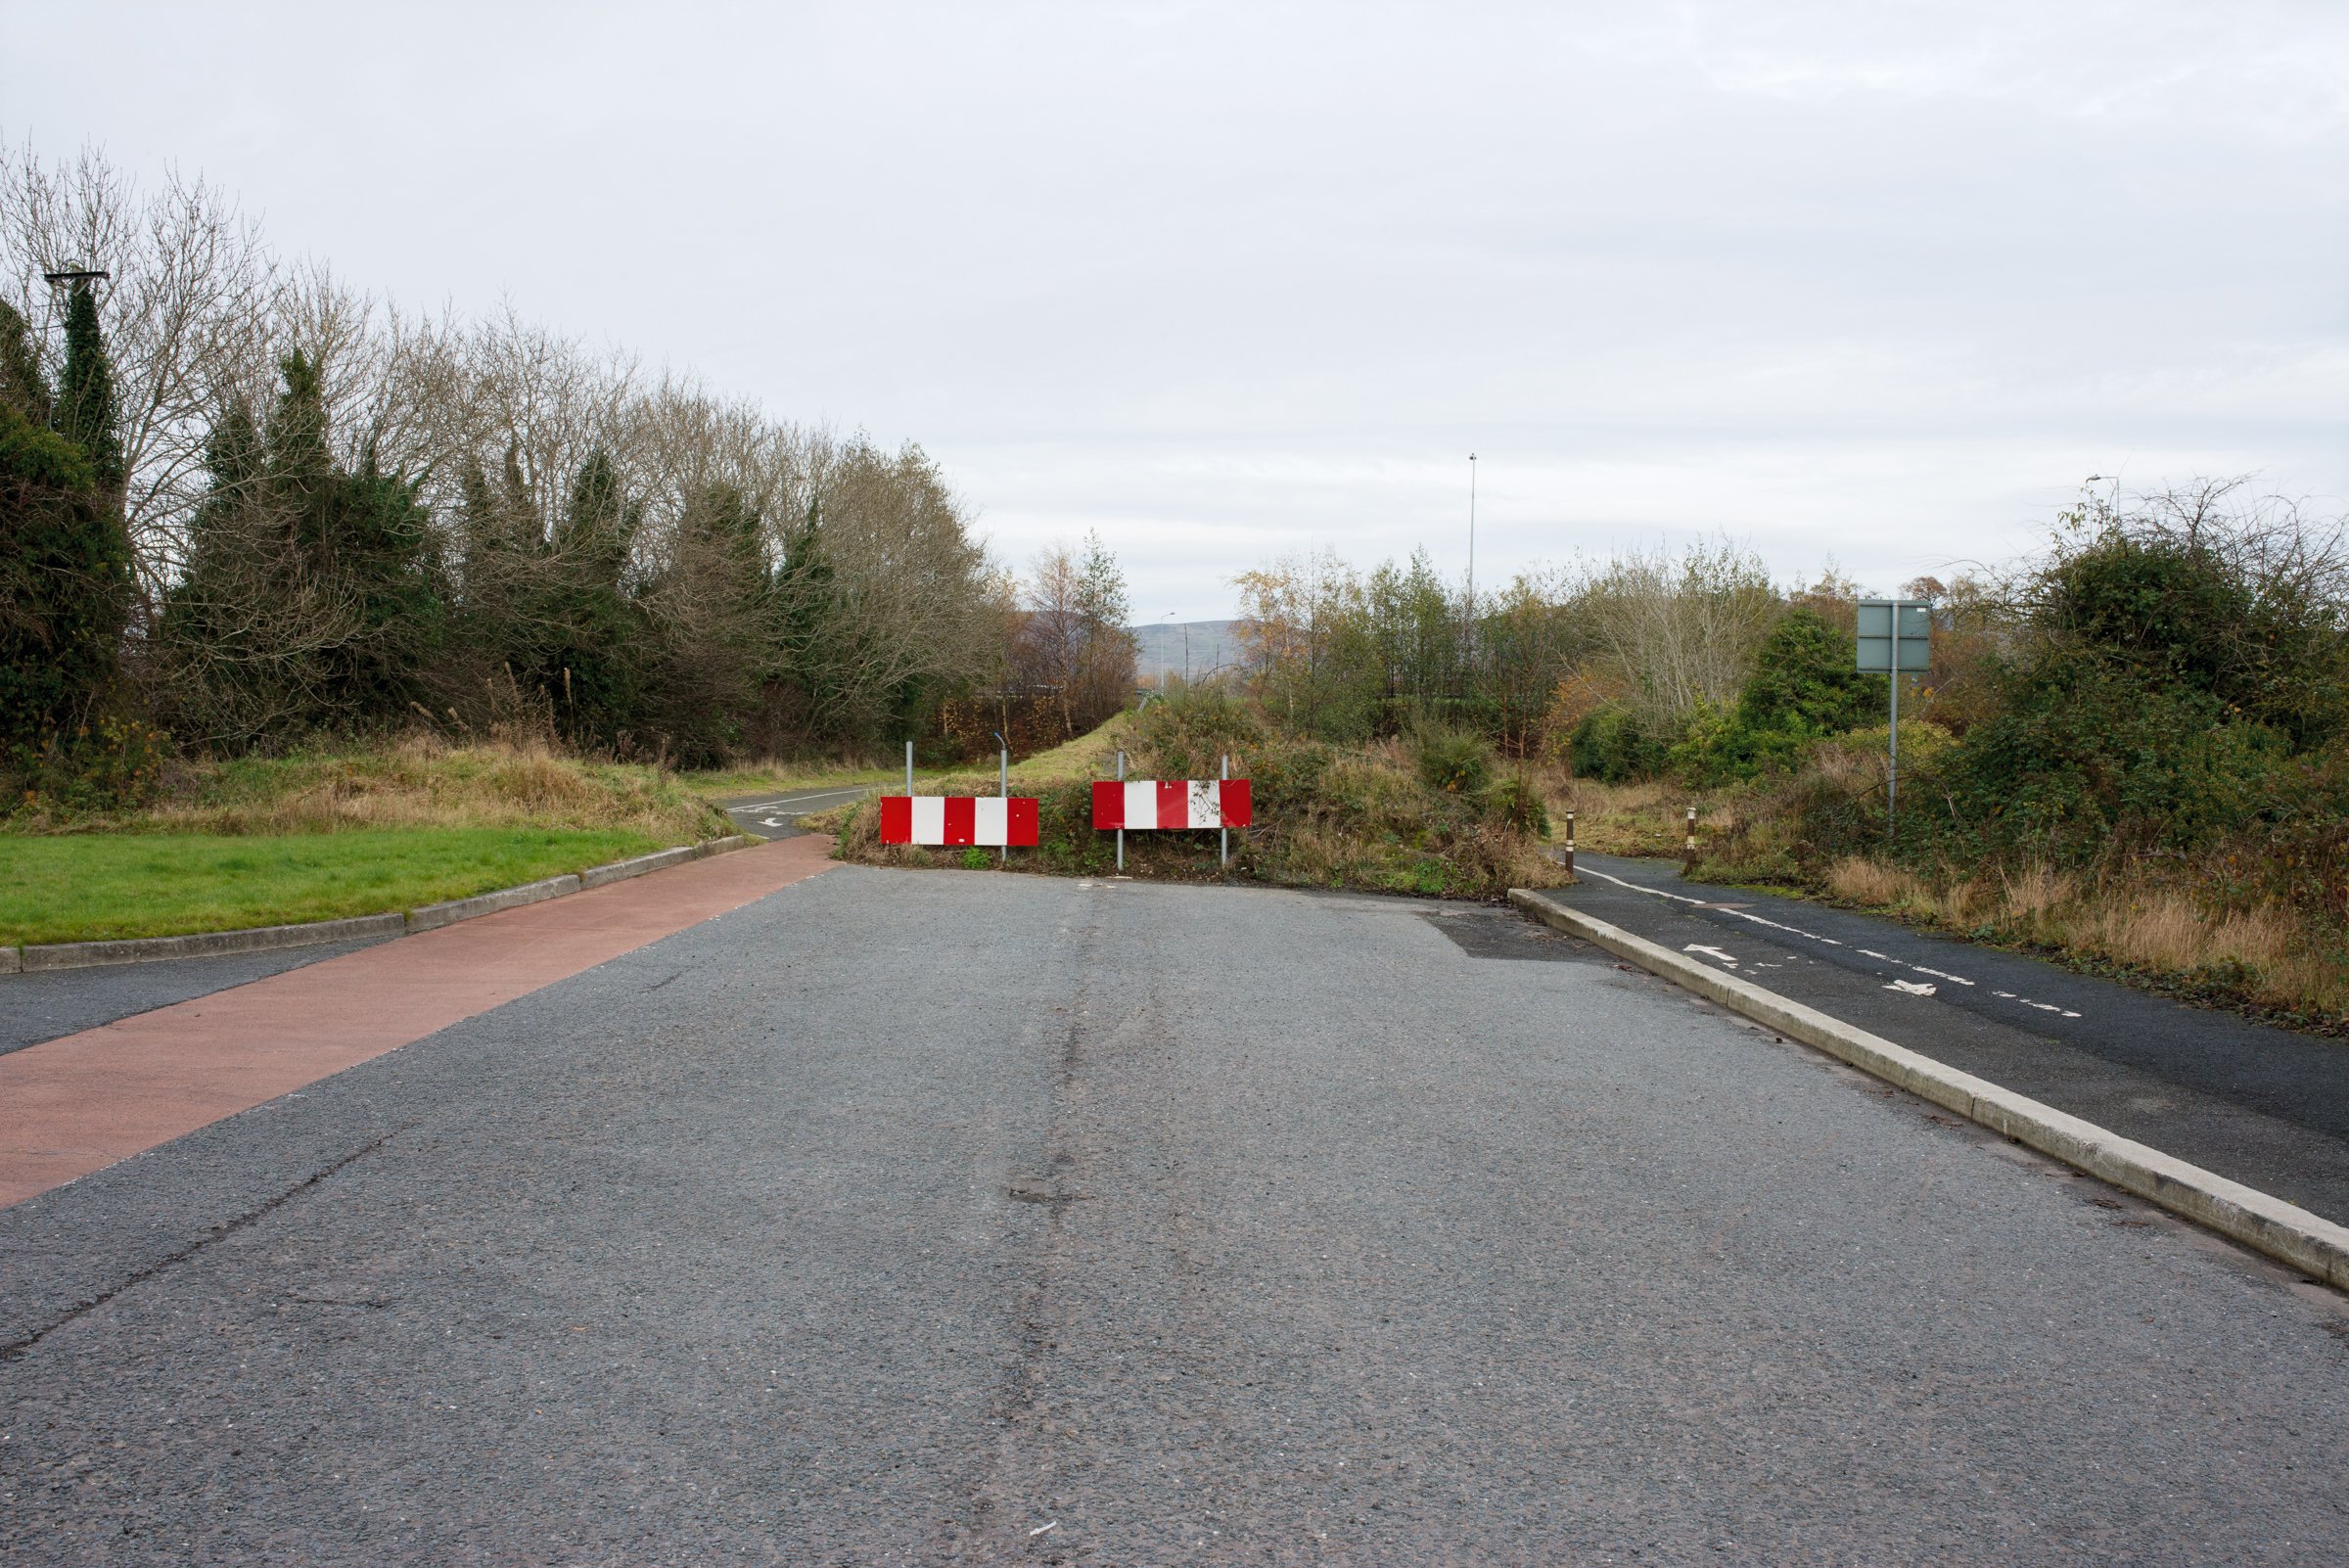 Ciarán Dunbar, Old Newry Road, from the series Diesel